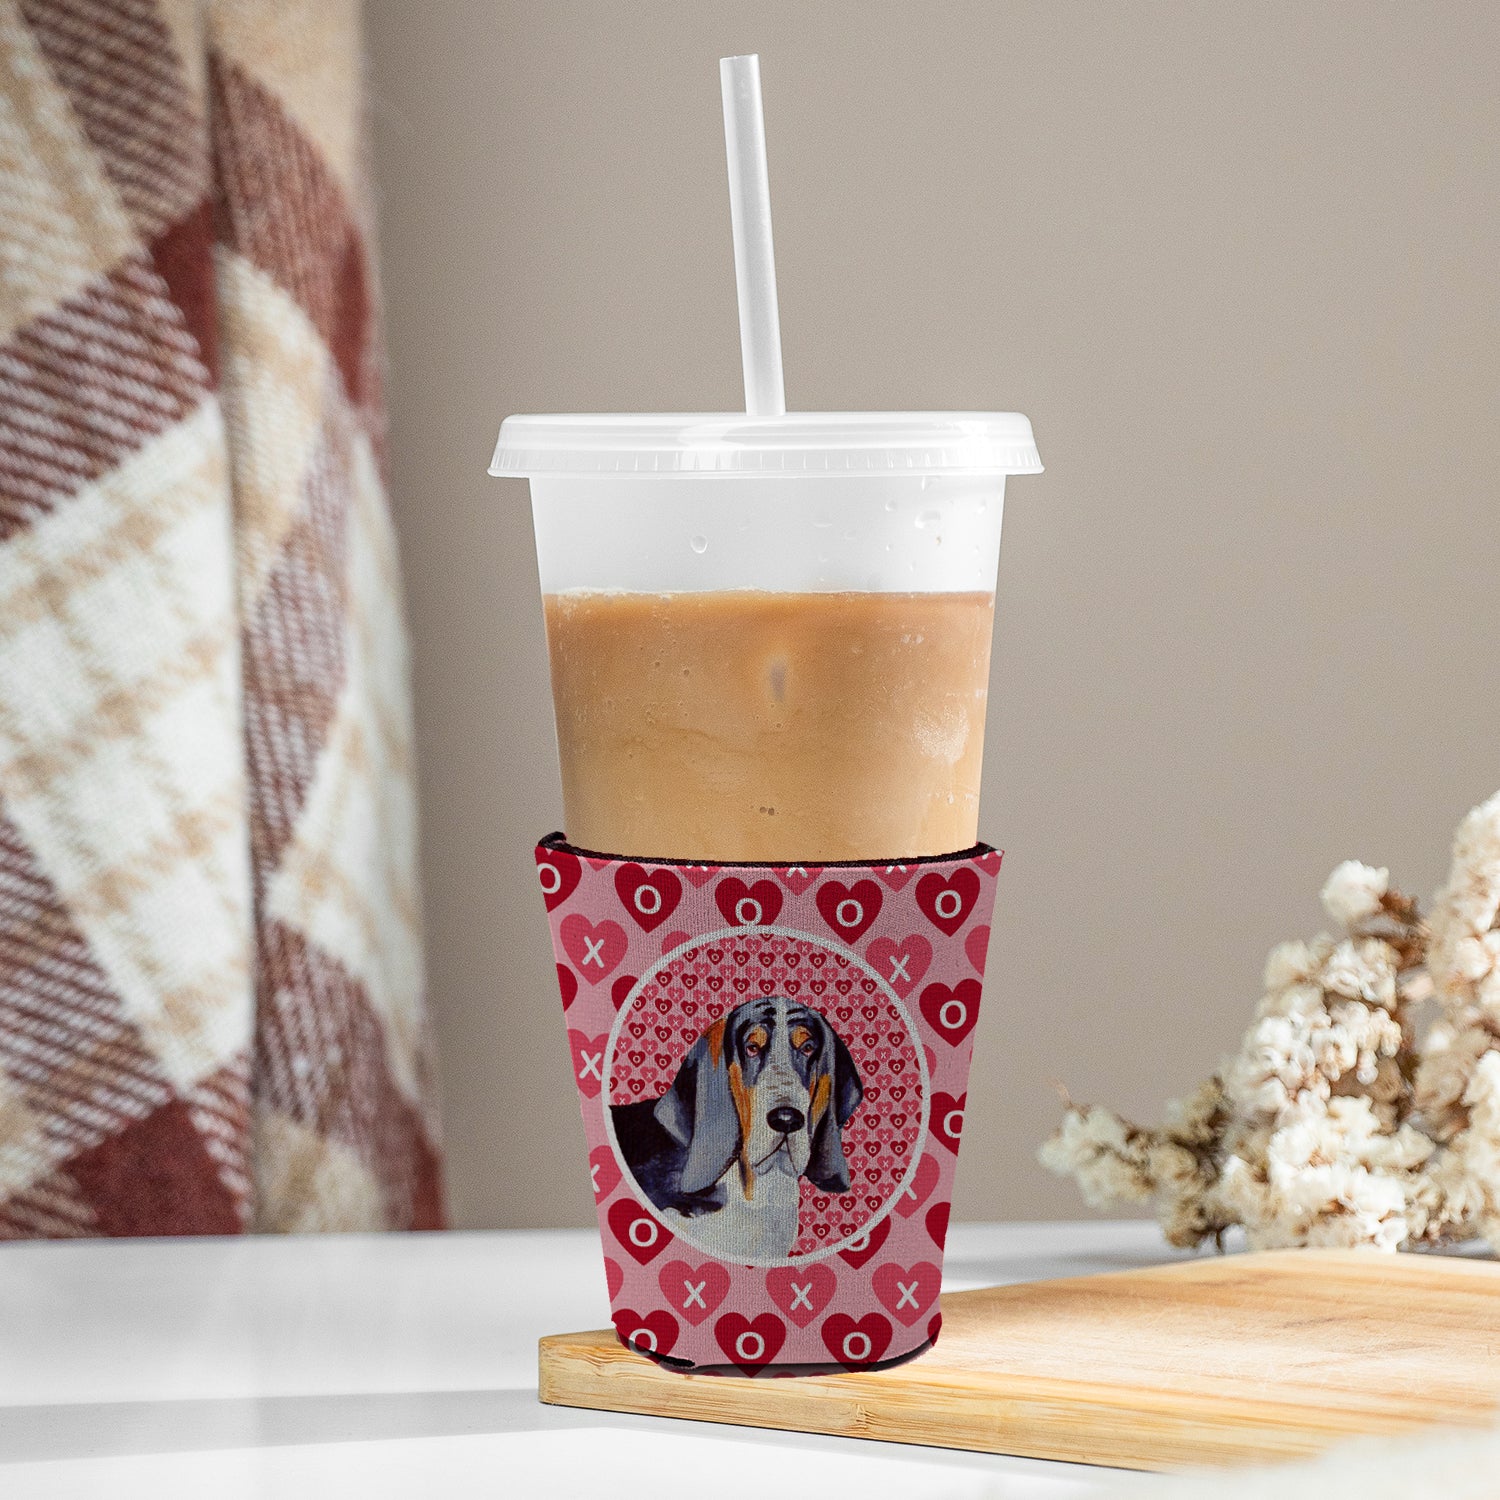 Basset Hound Valentine's Love and Hearts Red Cup Beverage Insulator Hugger  the-store.com.